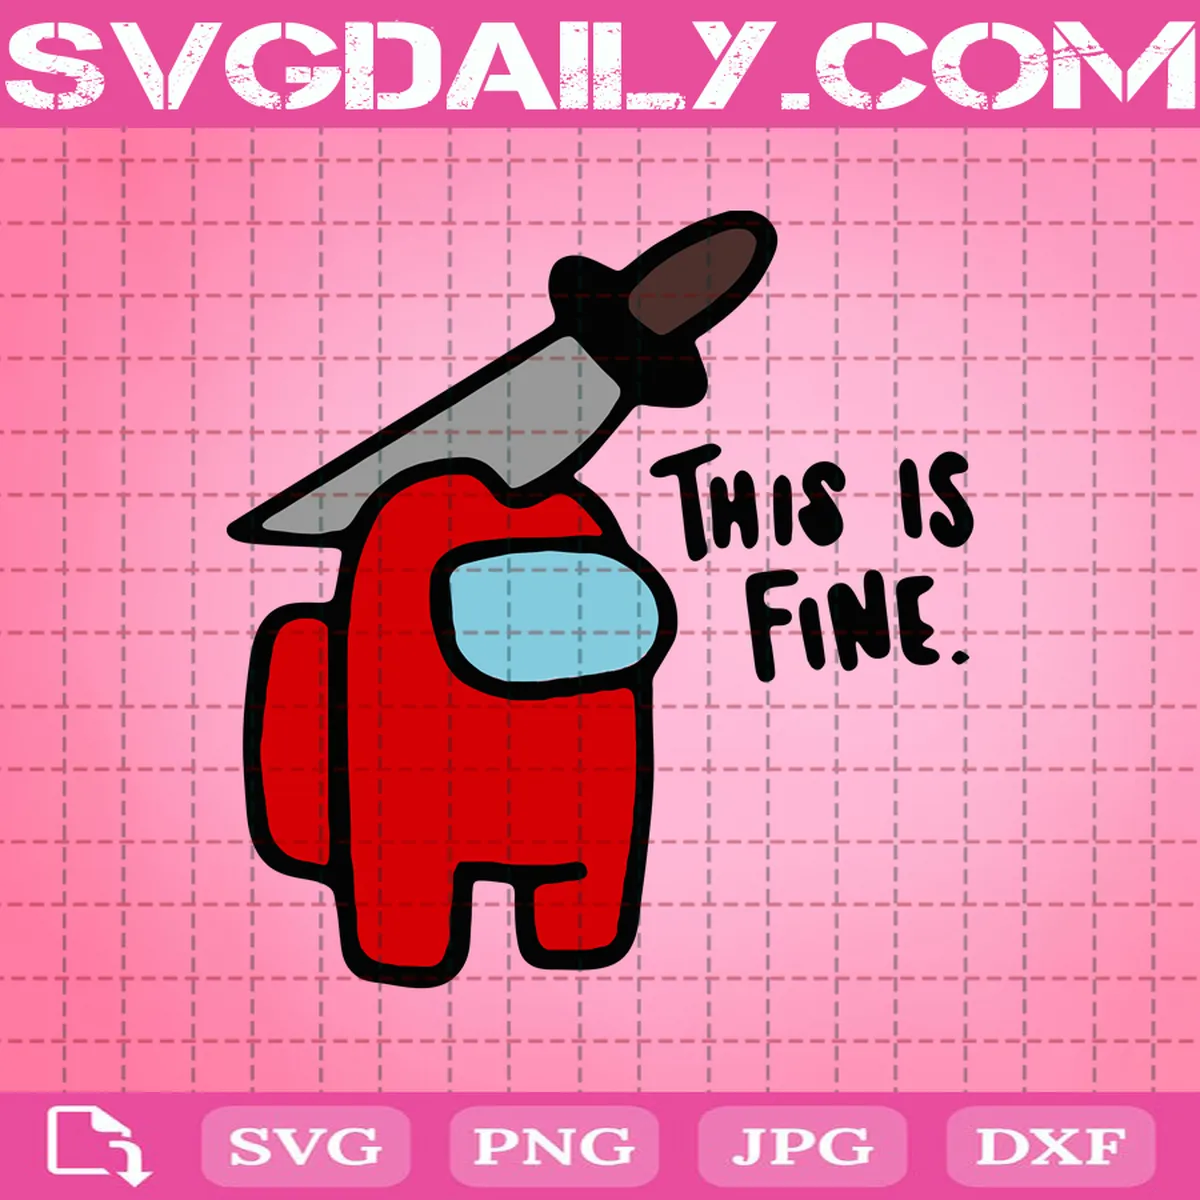 Among This Is Fine Svg, Among Us Svg, This Is Fine Svg, Cricut Files, Clip Art, Instant Download, Digital Files, Svg, Png, Eps, Dxf